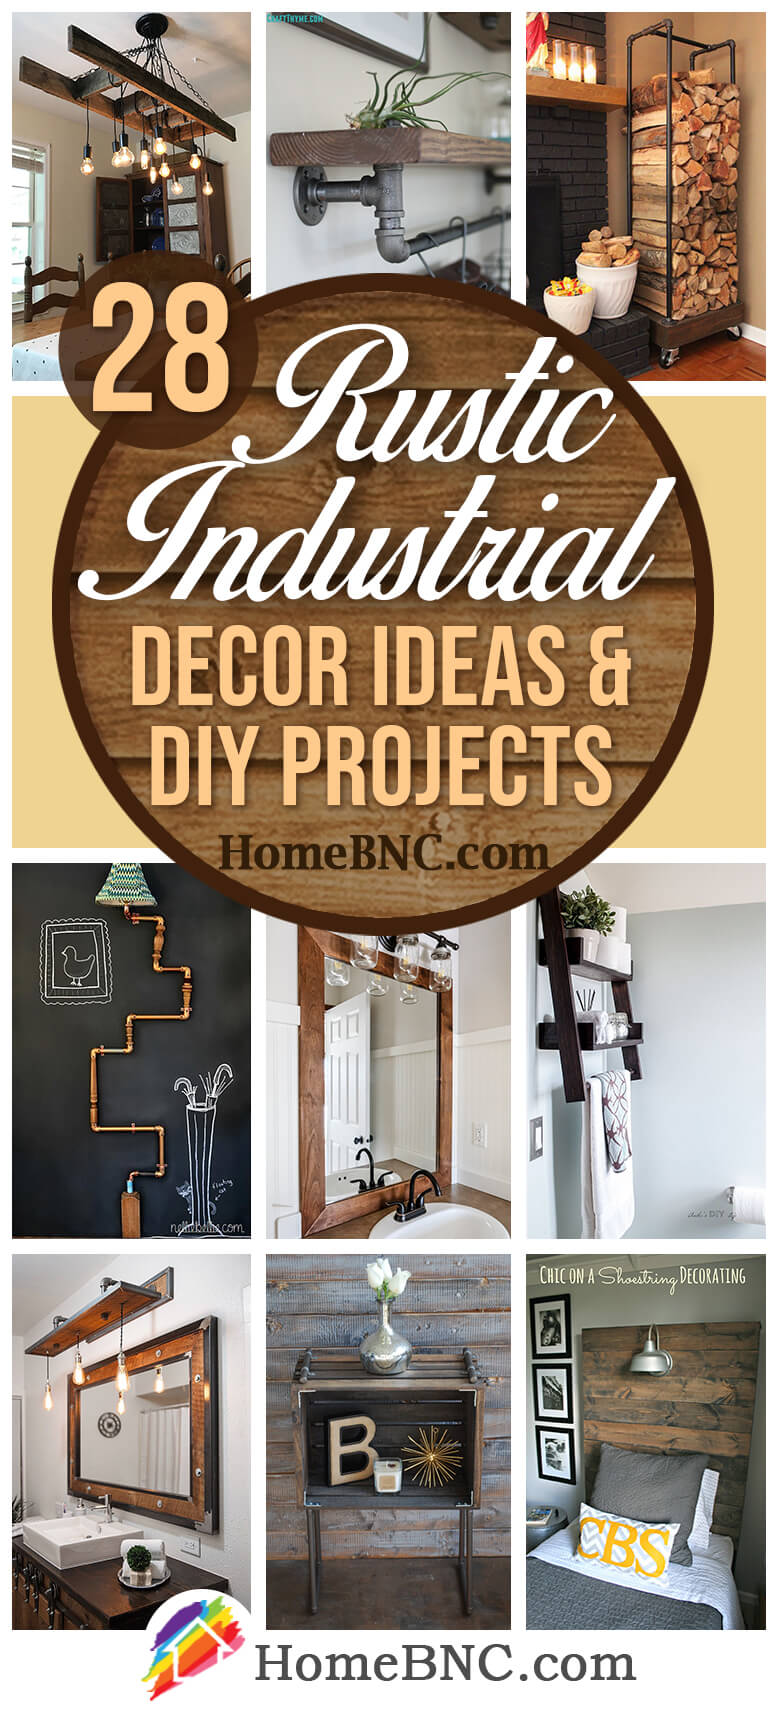 28 Best Diy Rustic Industrial Decor Ideas And Designs For 2020